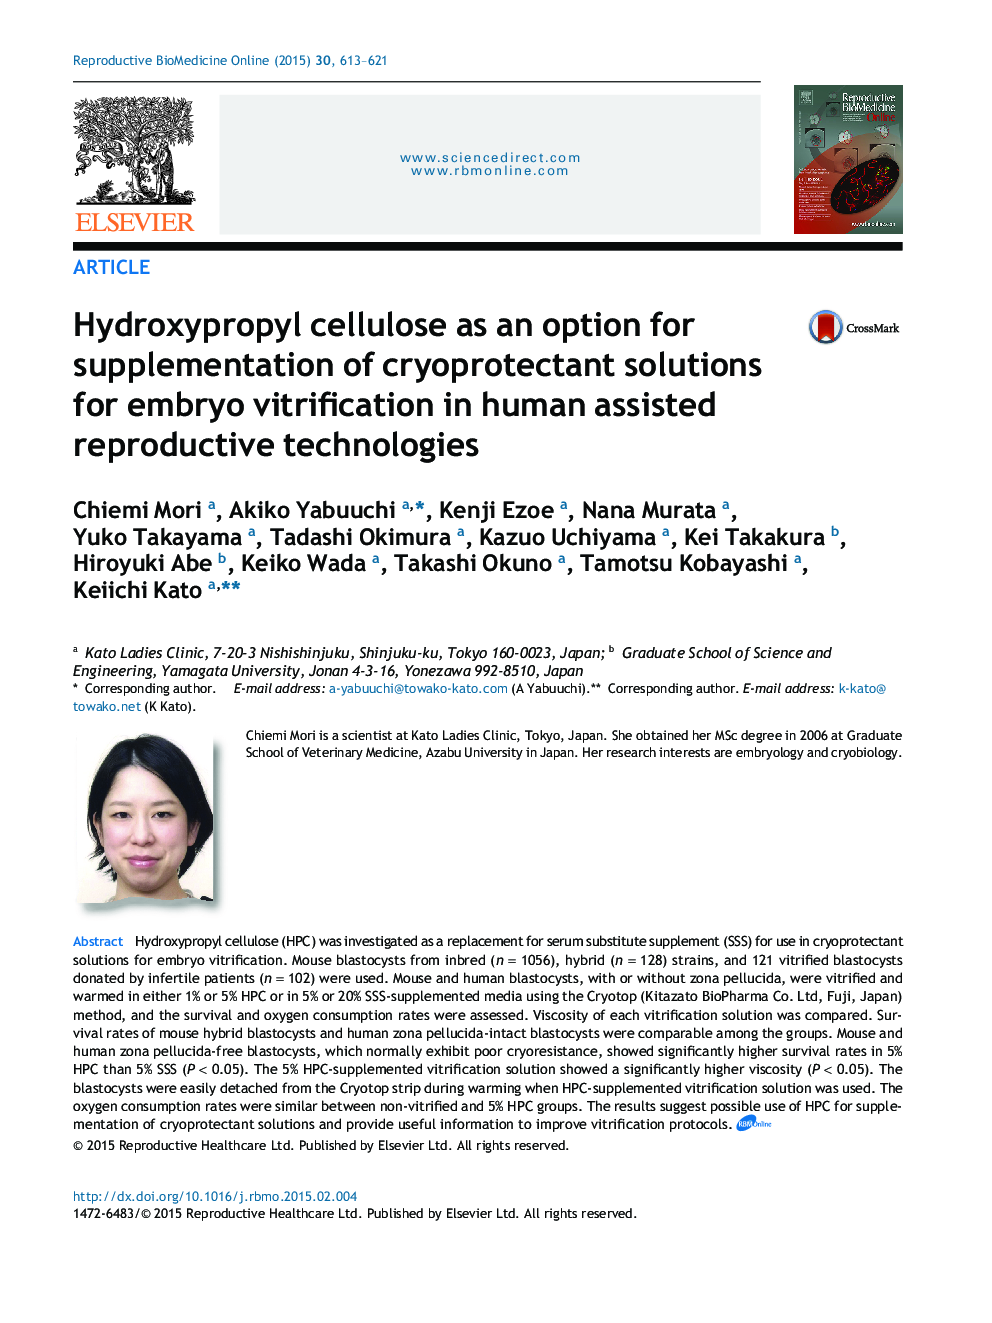 Hydroxypropyl cellulose as an option for supplementation of cryoprotectant solutions for embryo vitrification in human assisted reproductive technologies